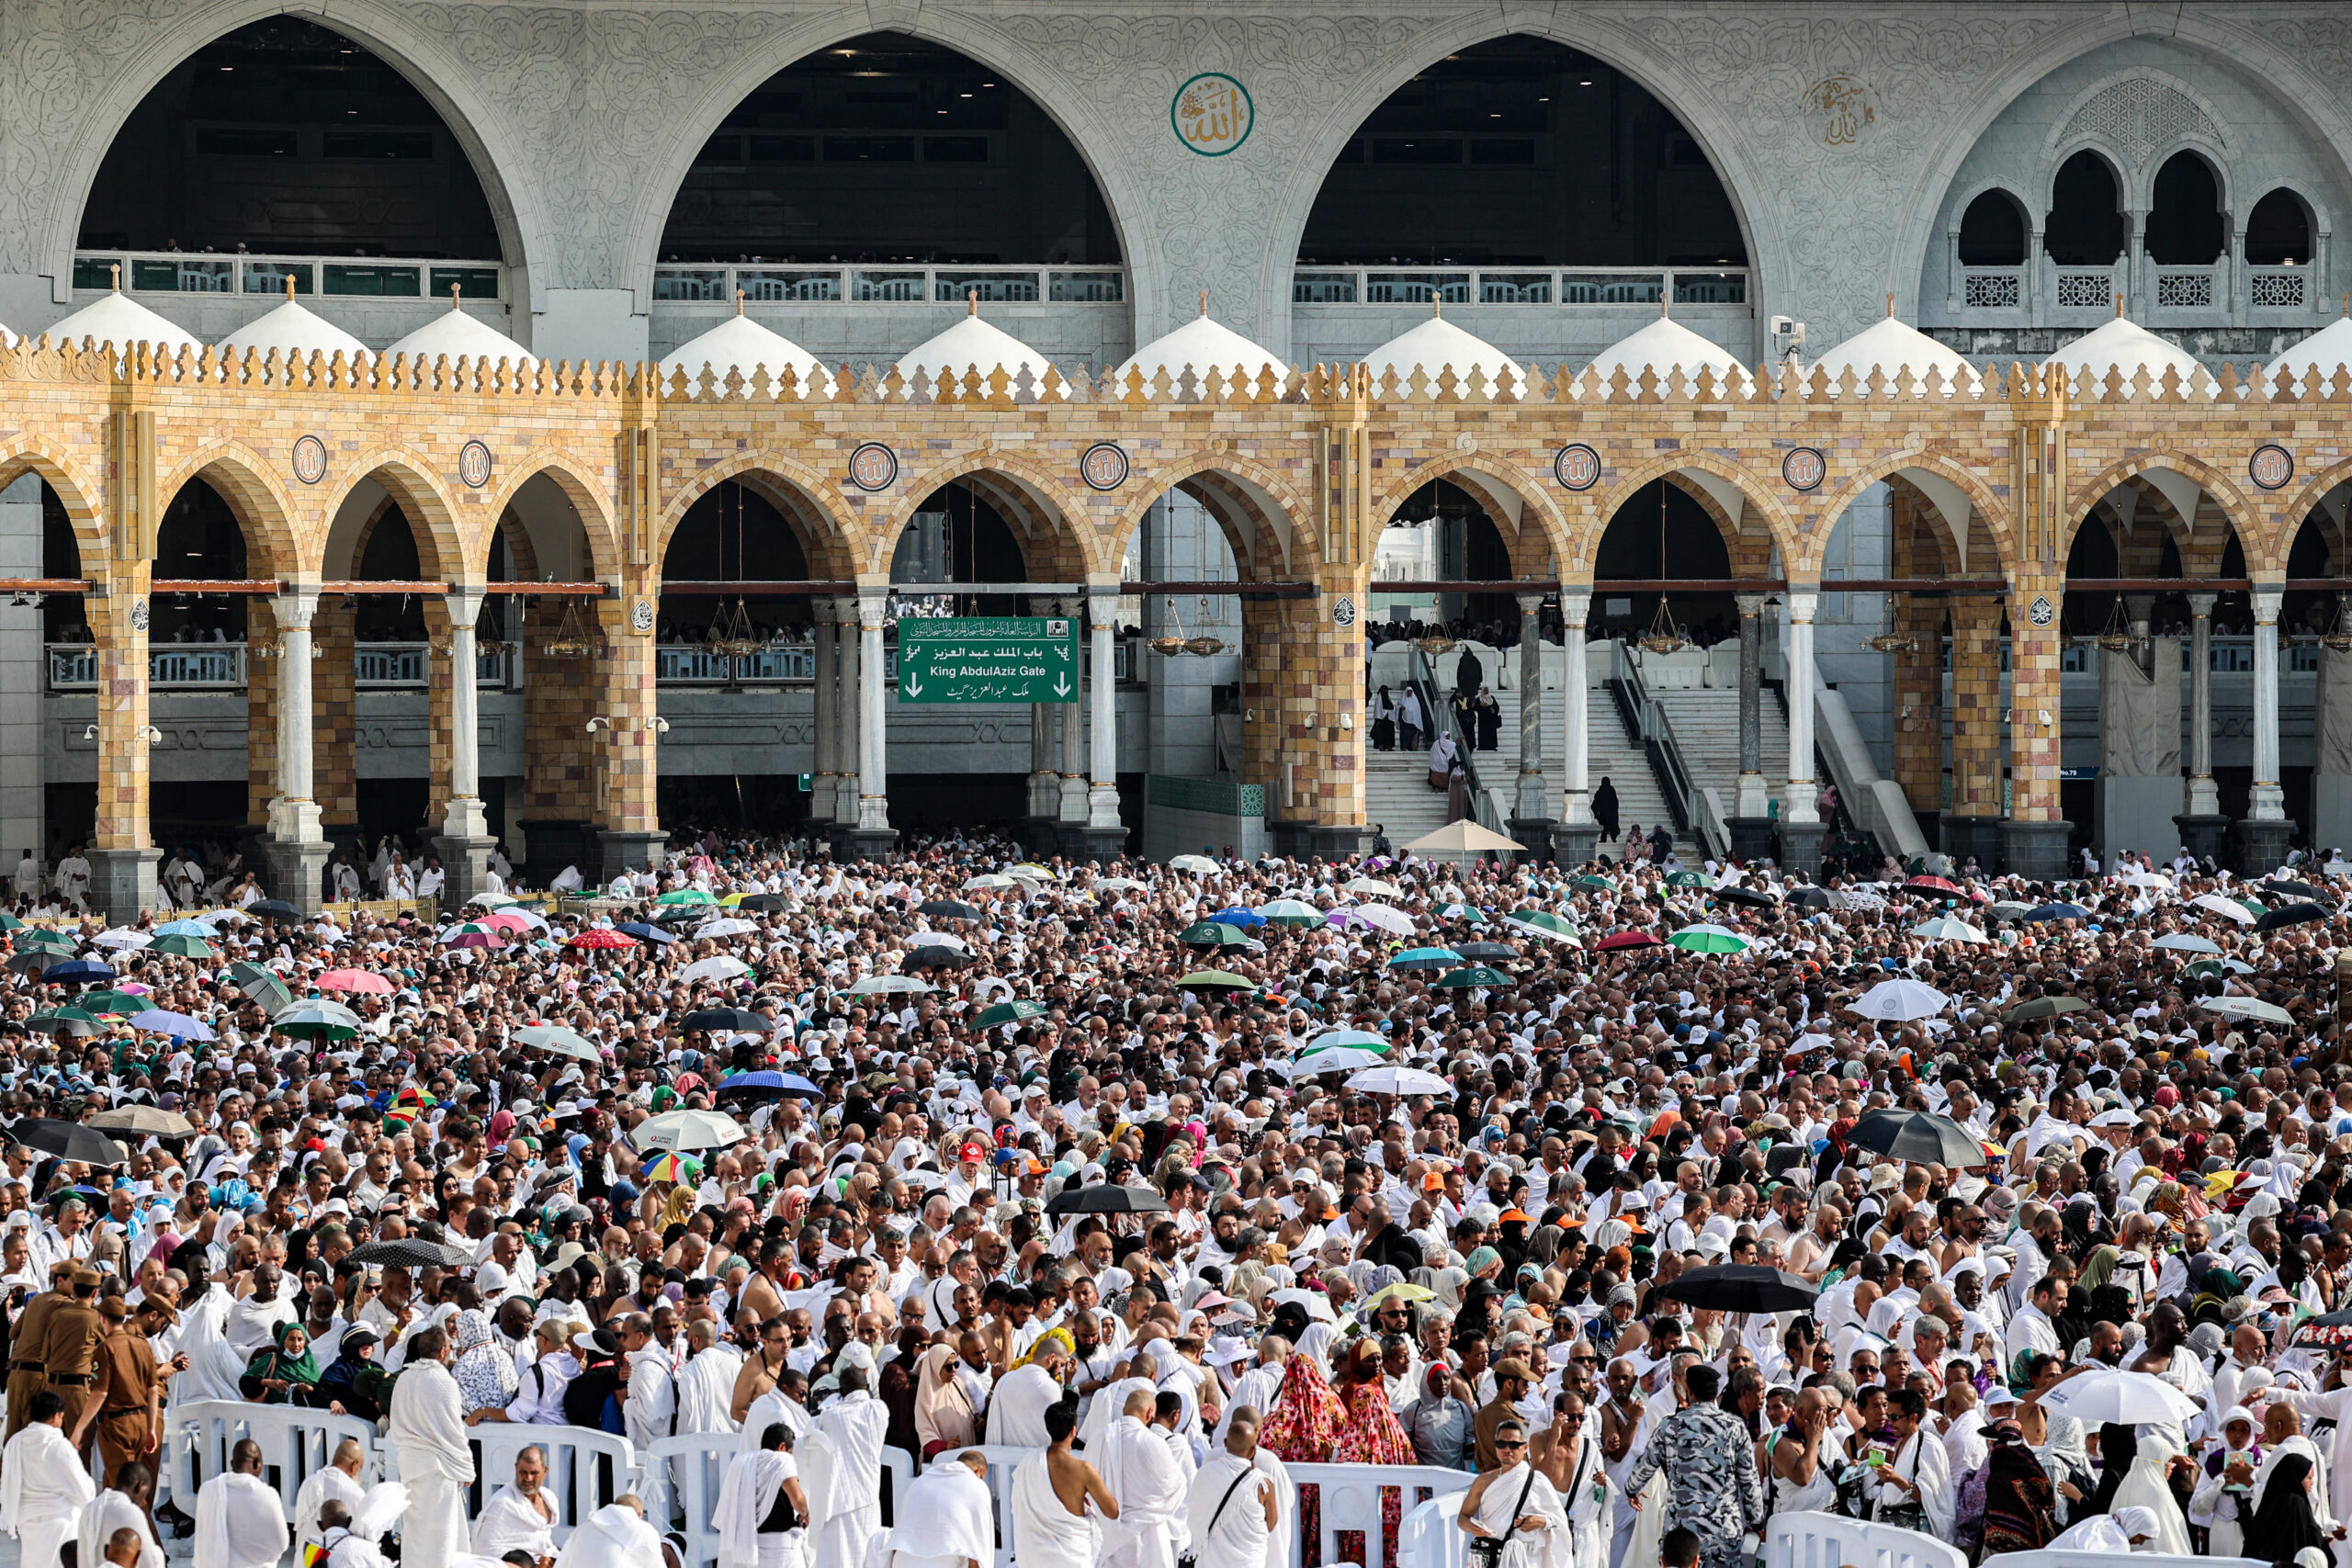 Saudi Arabia said on Saturday that security forces had cleared hundreds of thousands of unregistered pilgrims from Mecca ahead of the hajj which begins next week. 